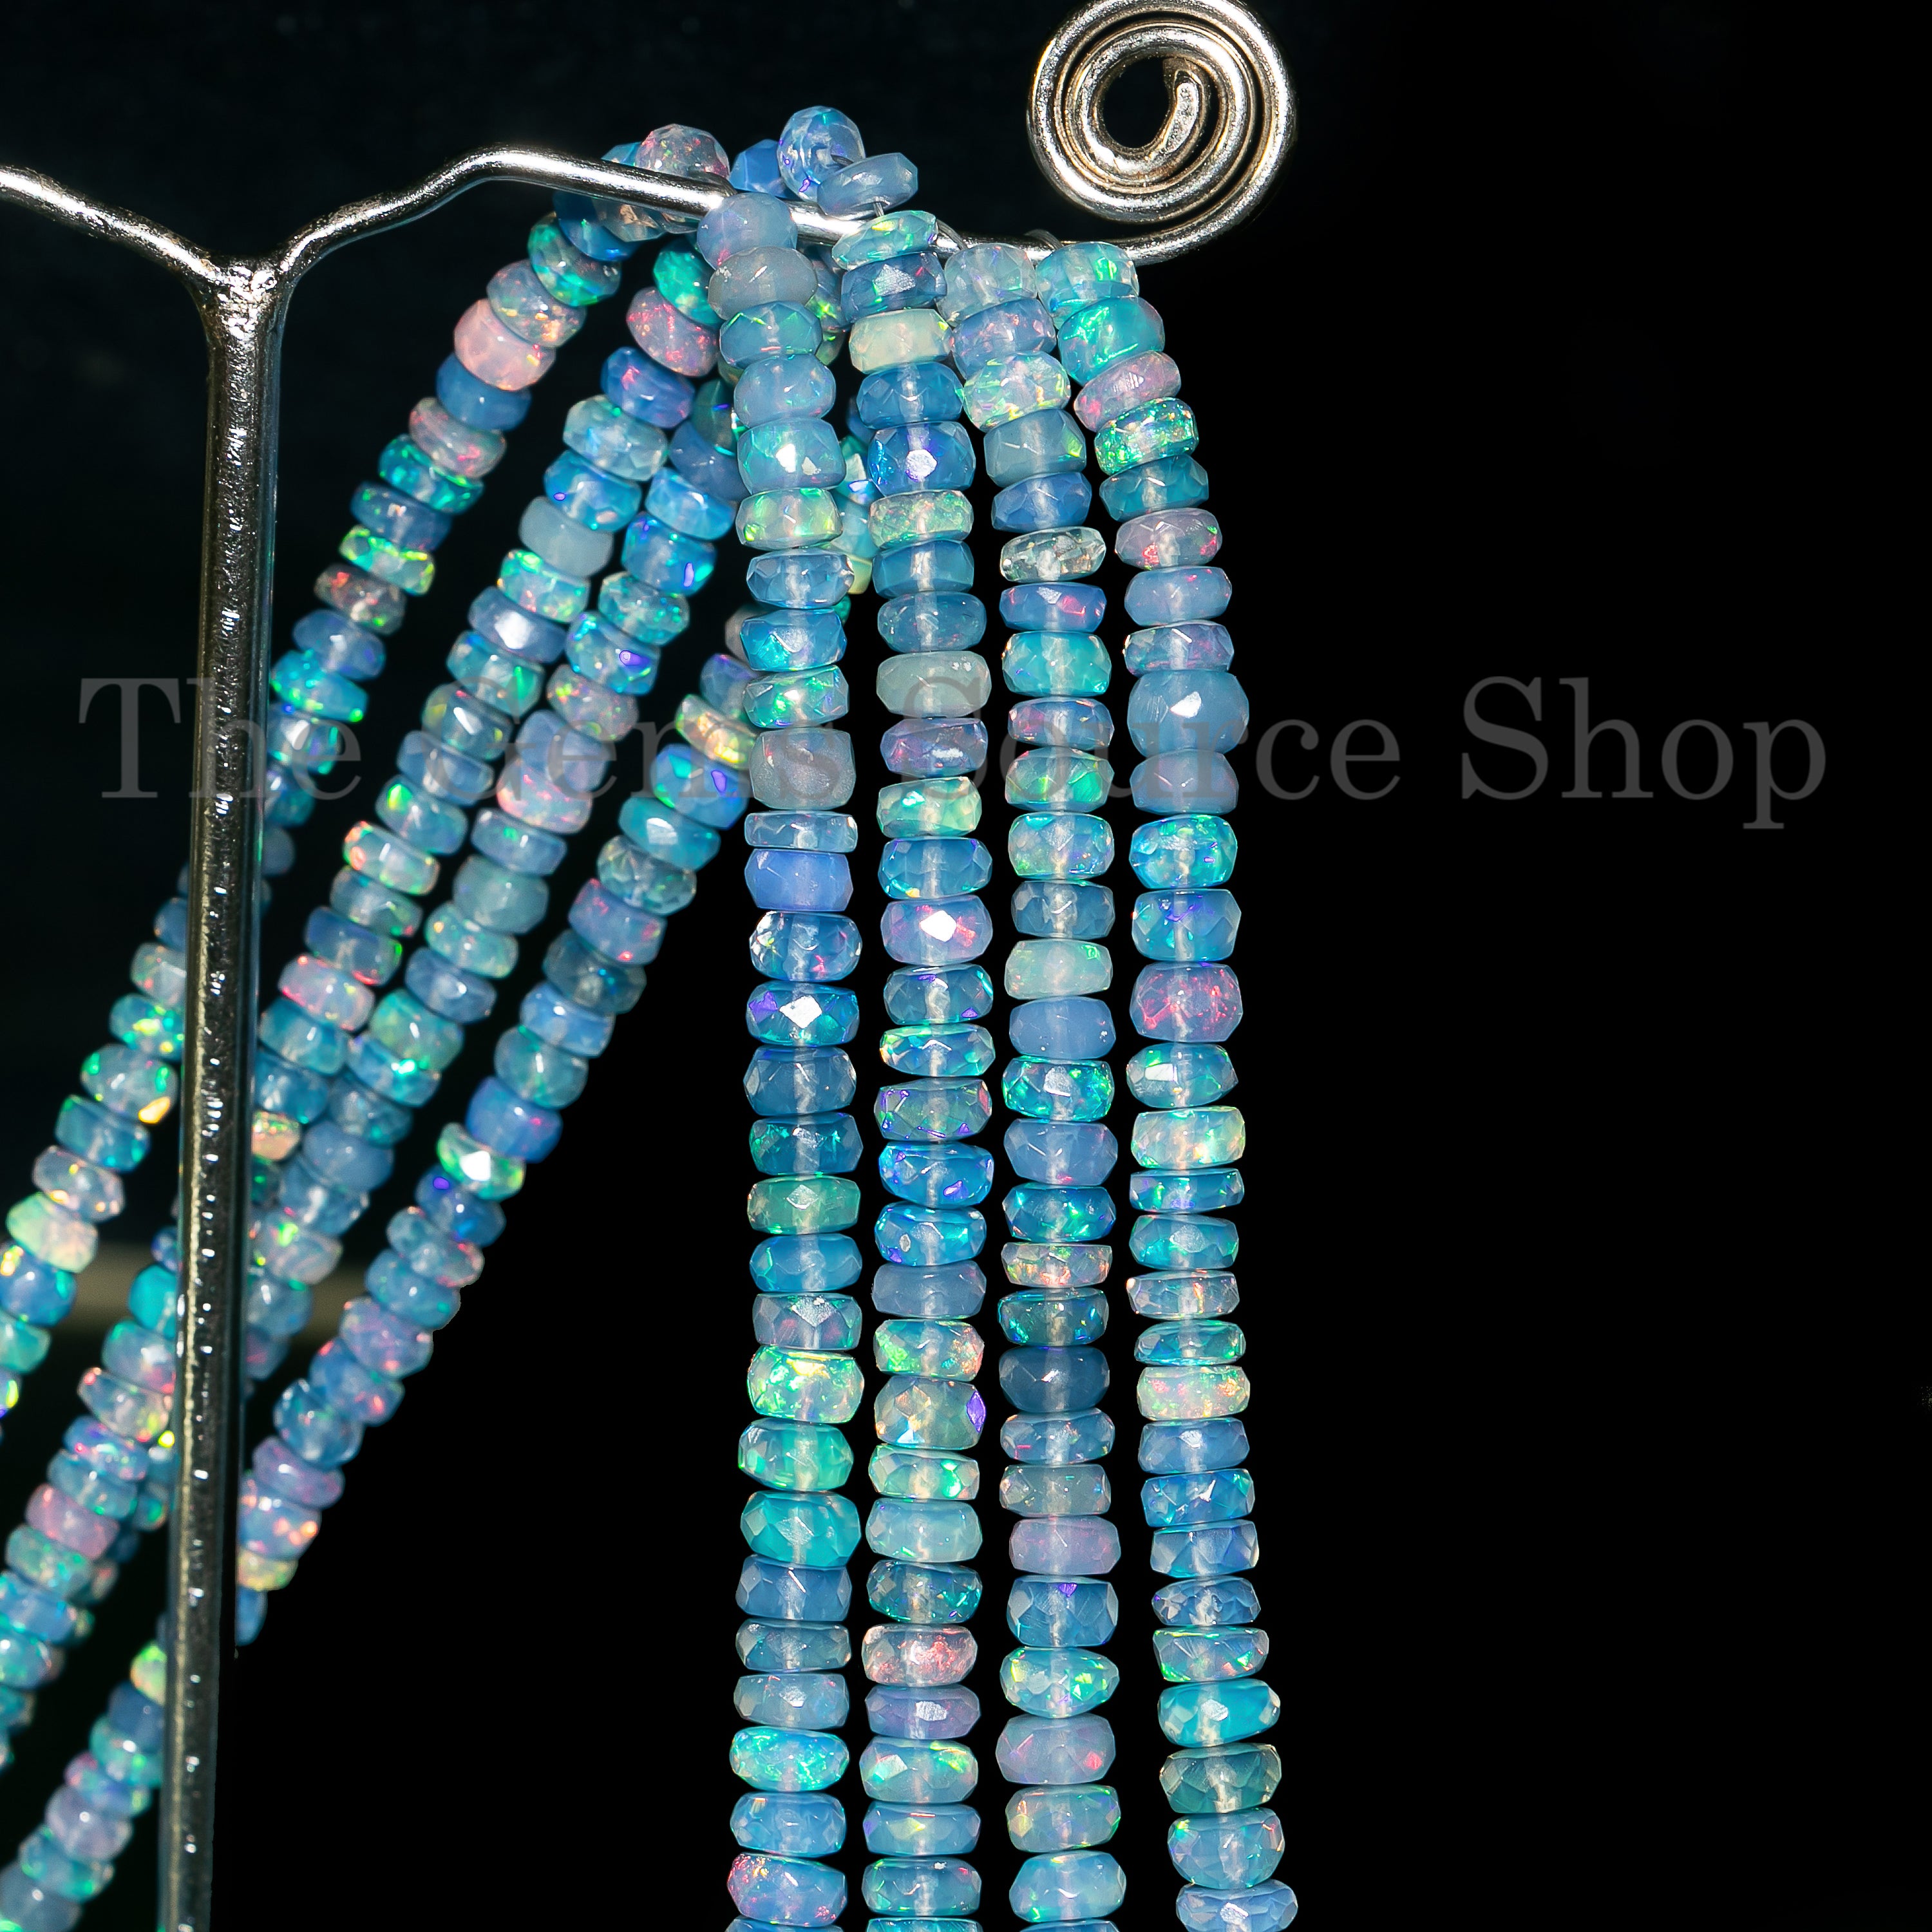 Lavender Opal Beads, 4-5.5mm Opal Rondelle Beads, Opal Faceted Beads, Ethiopian Rondelle Beads , Lavender Opal Faceted Beads